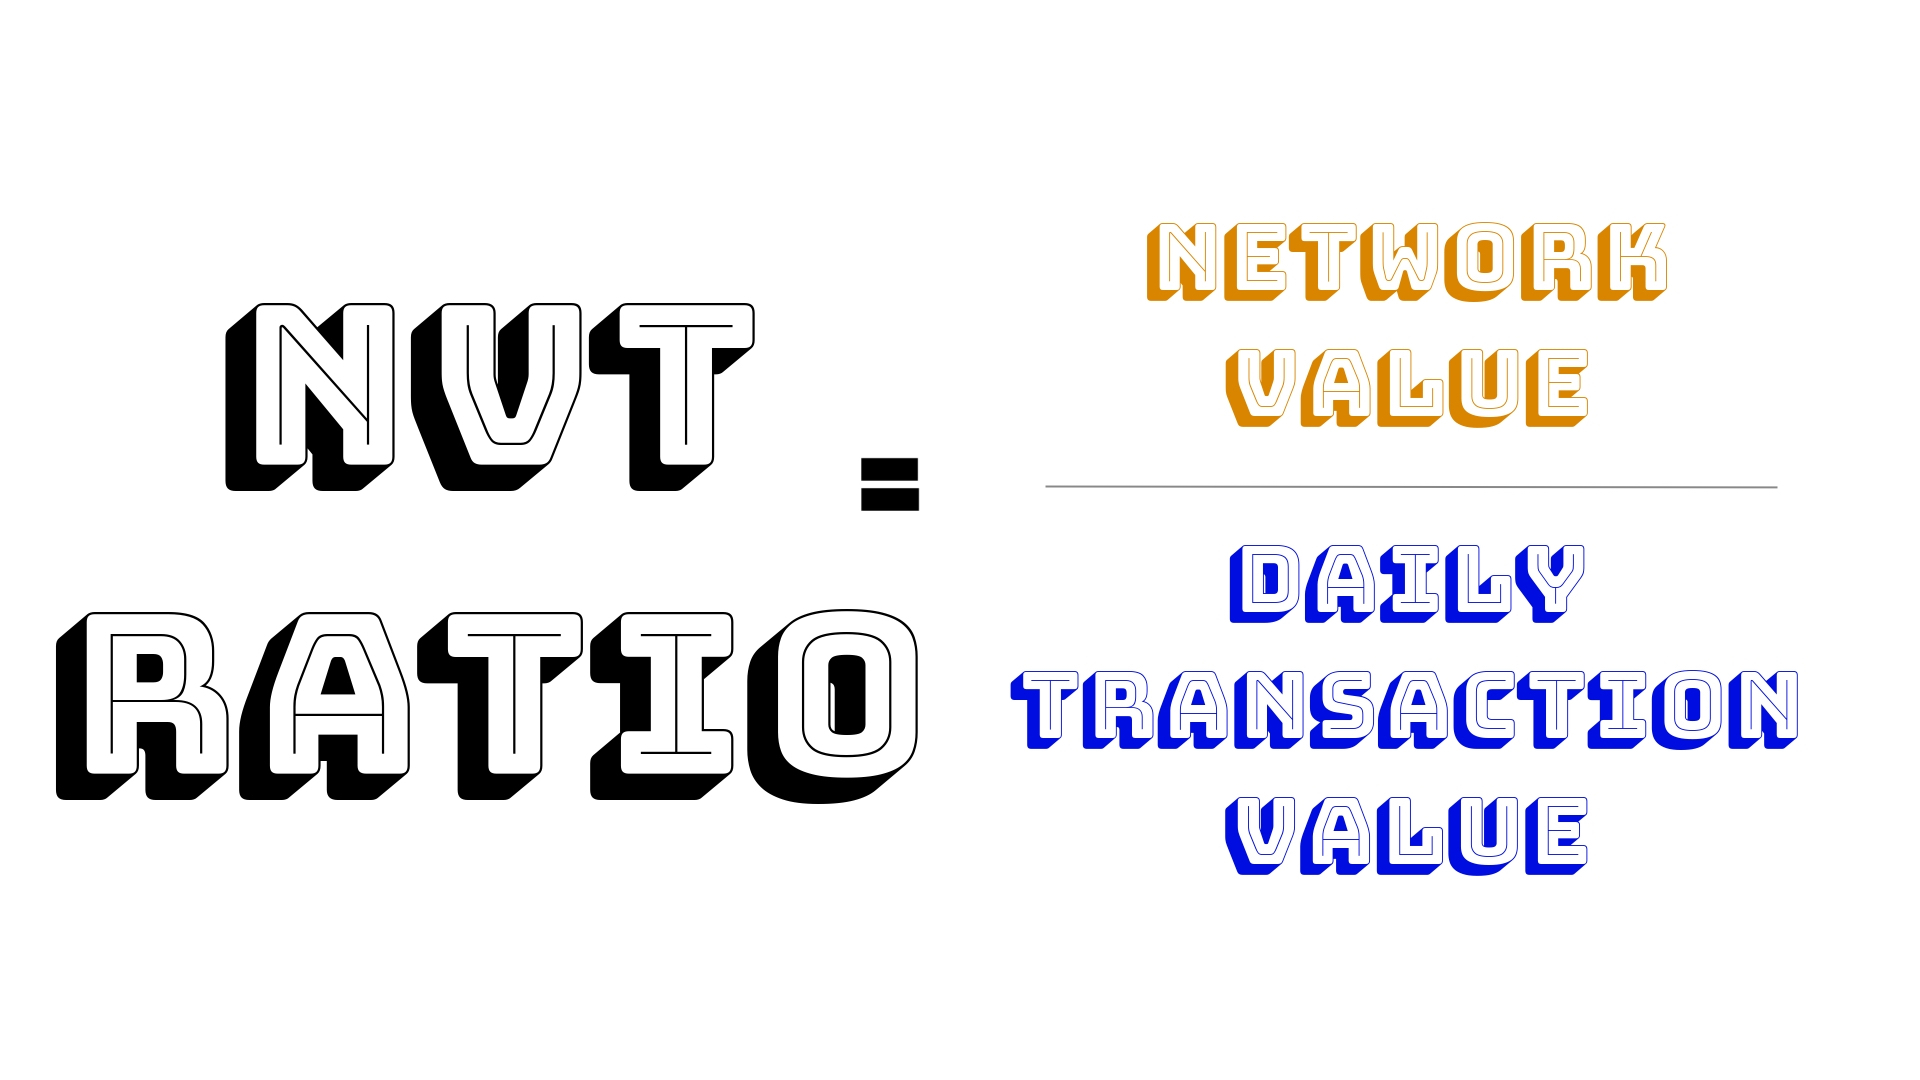 NVT Ratio Network value divided by daily transaction value